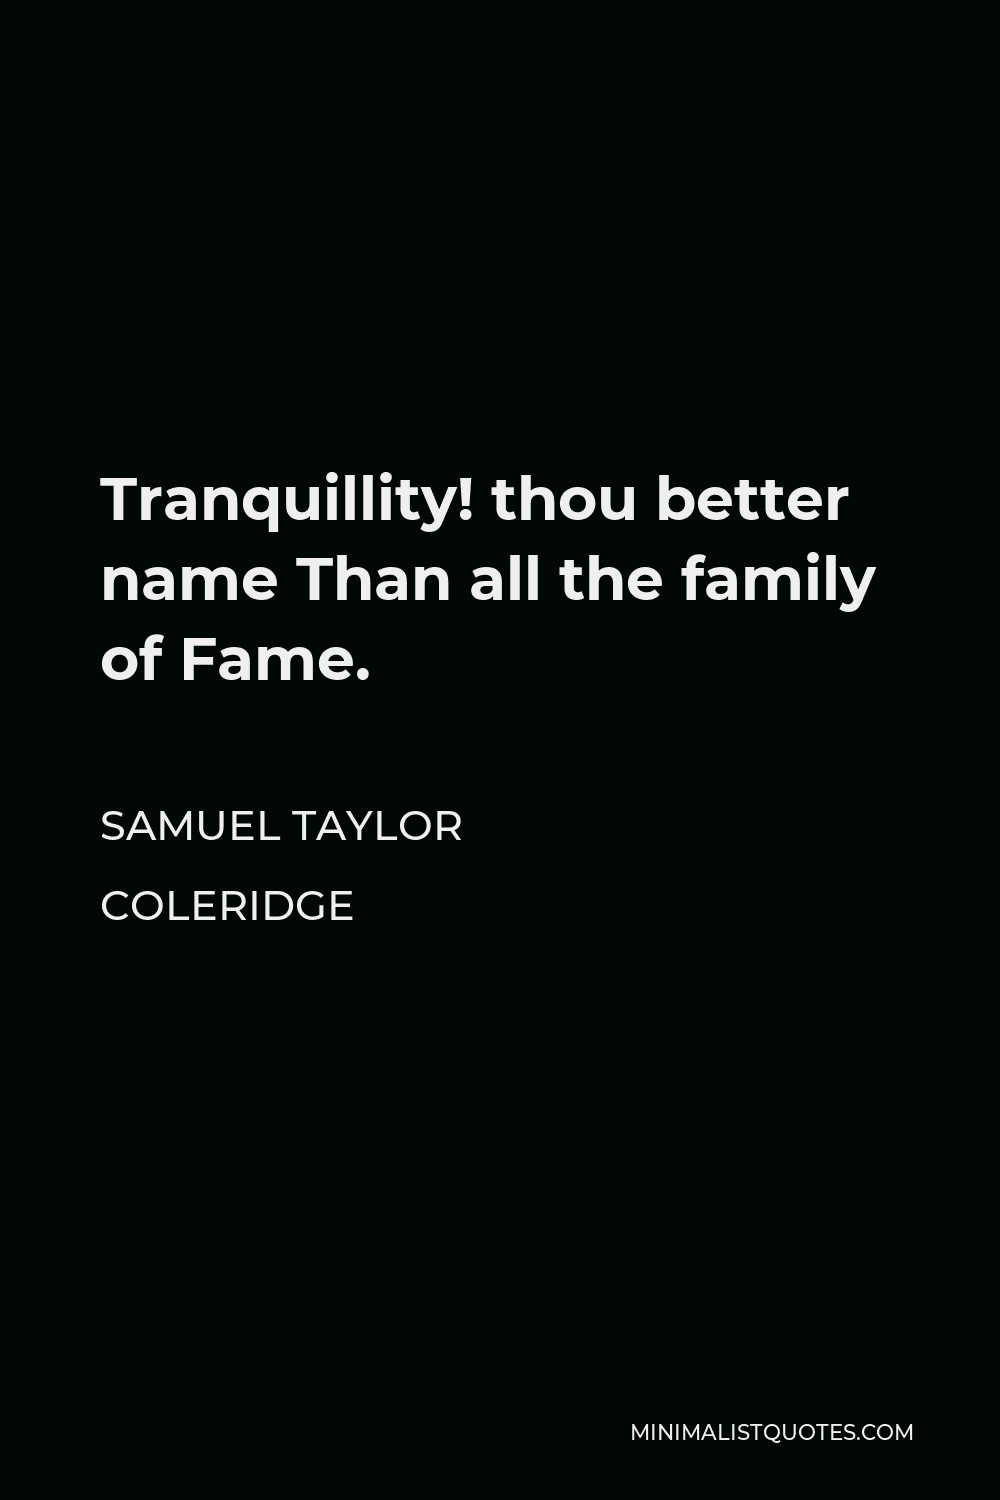 Samuel Taylor Coleridge Quote - Tranquillity! thou better name Than all the family of Fame.